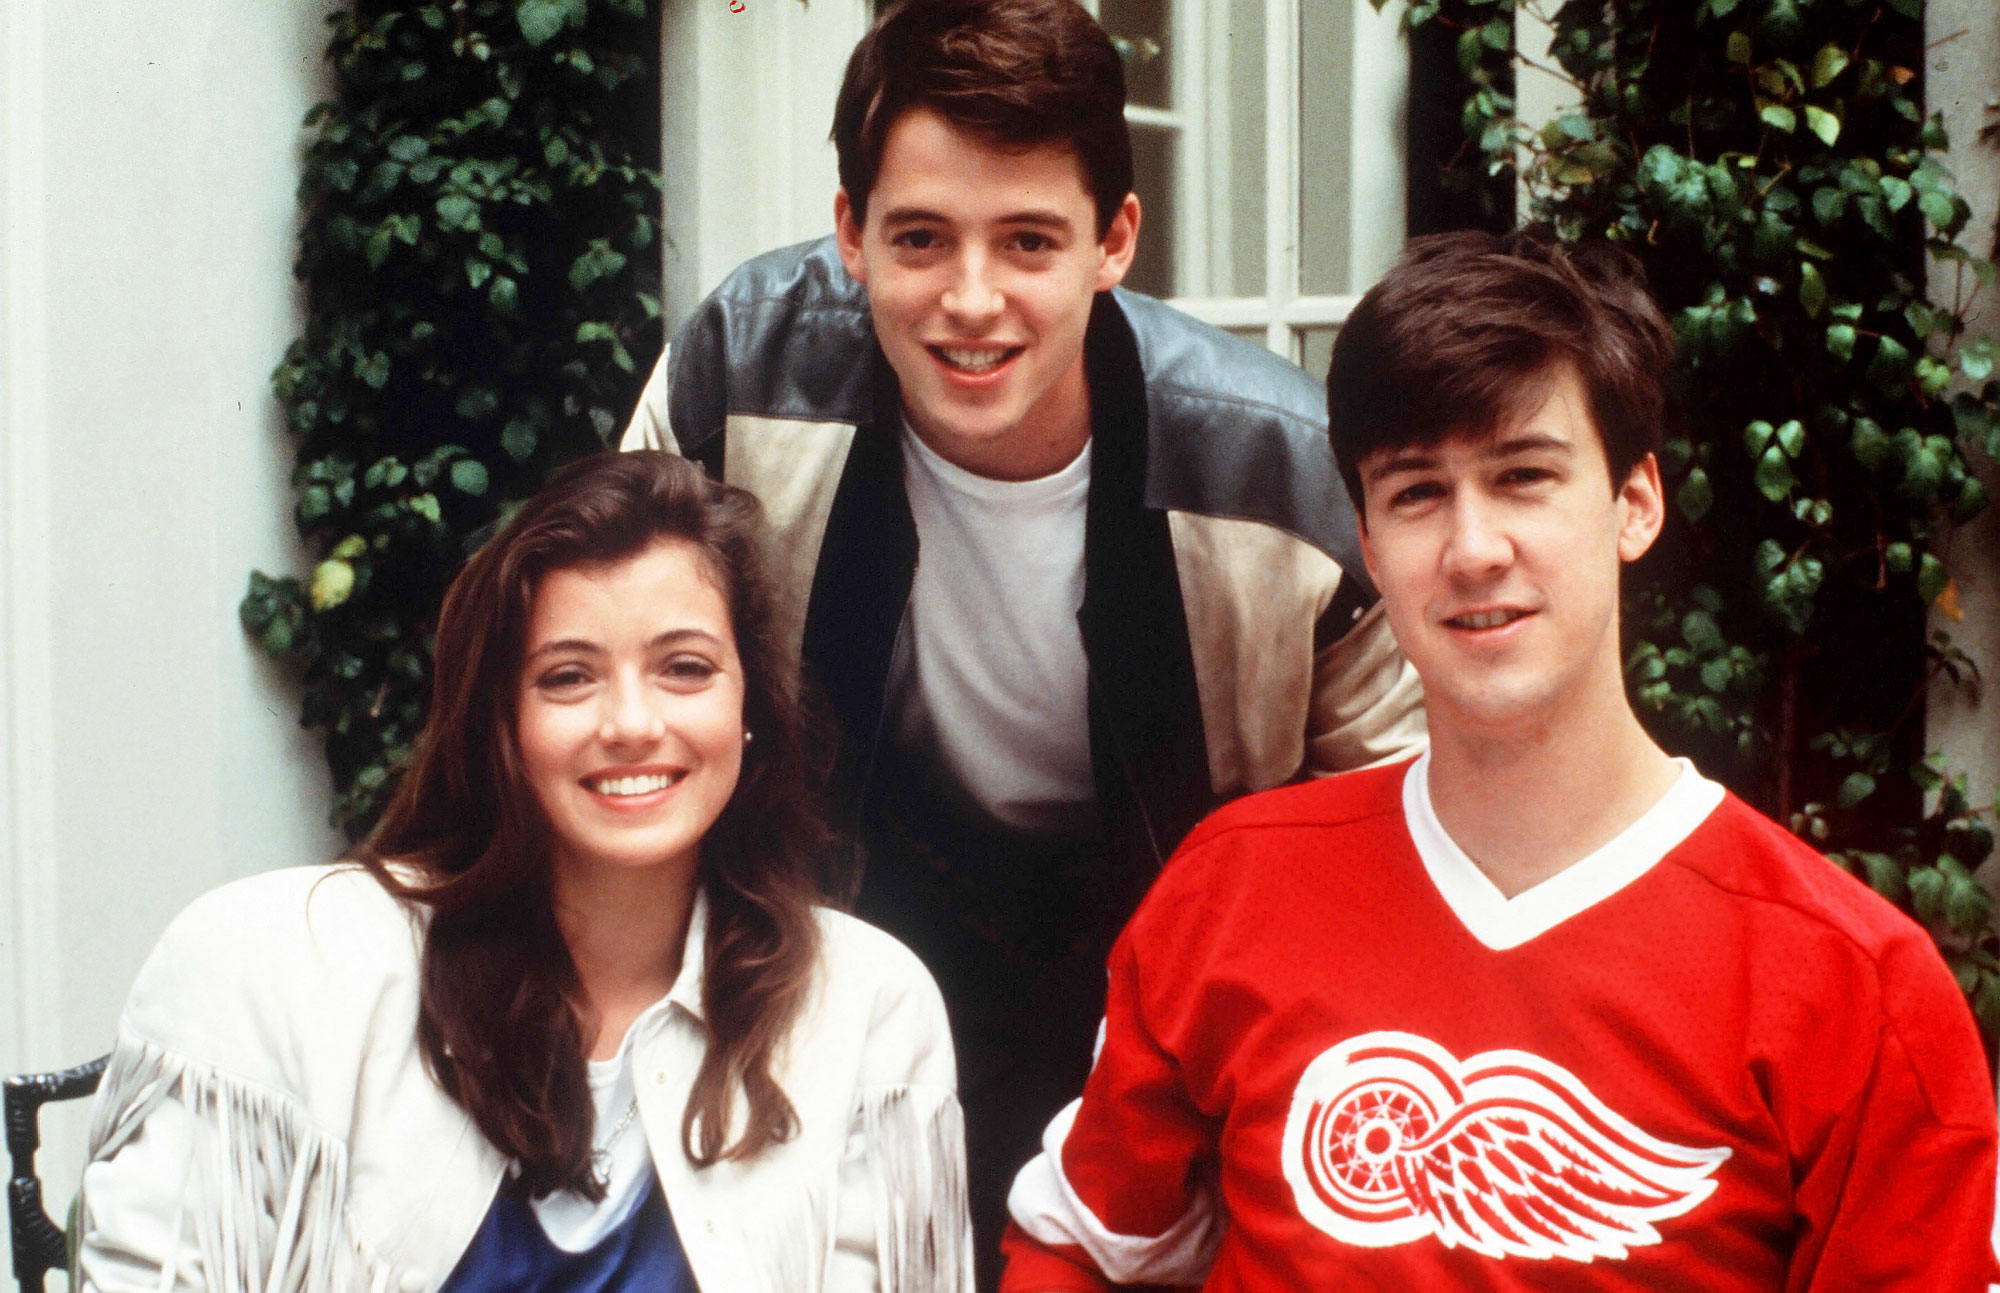 Alan Ruck, 'Succession' and 'Ferris Bueller' actor, sued over